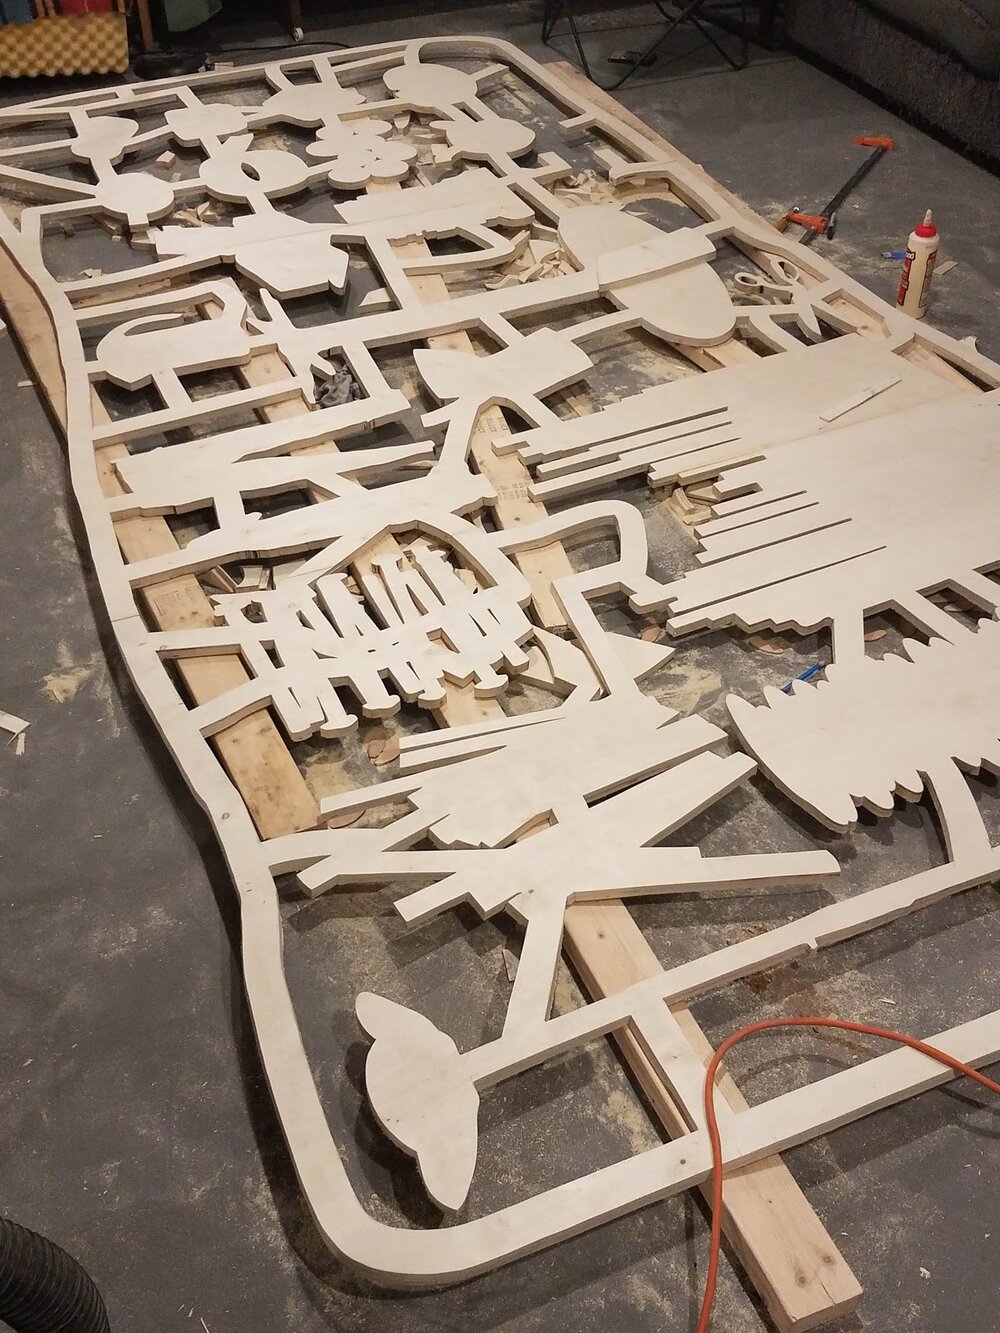 Fabrication and staging of The Anatomy Lesson's wooden frame